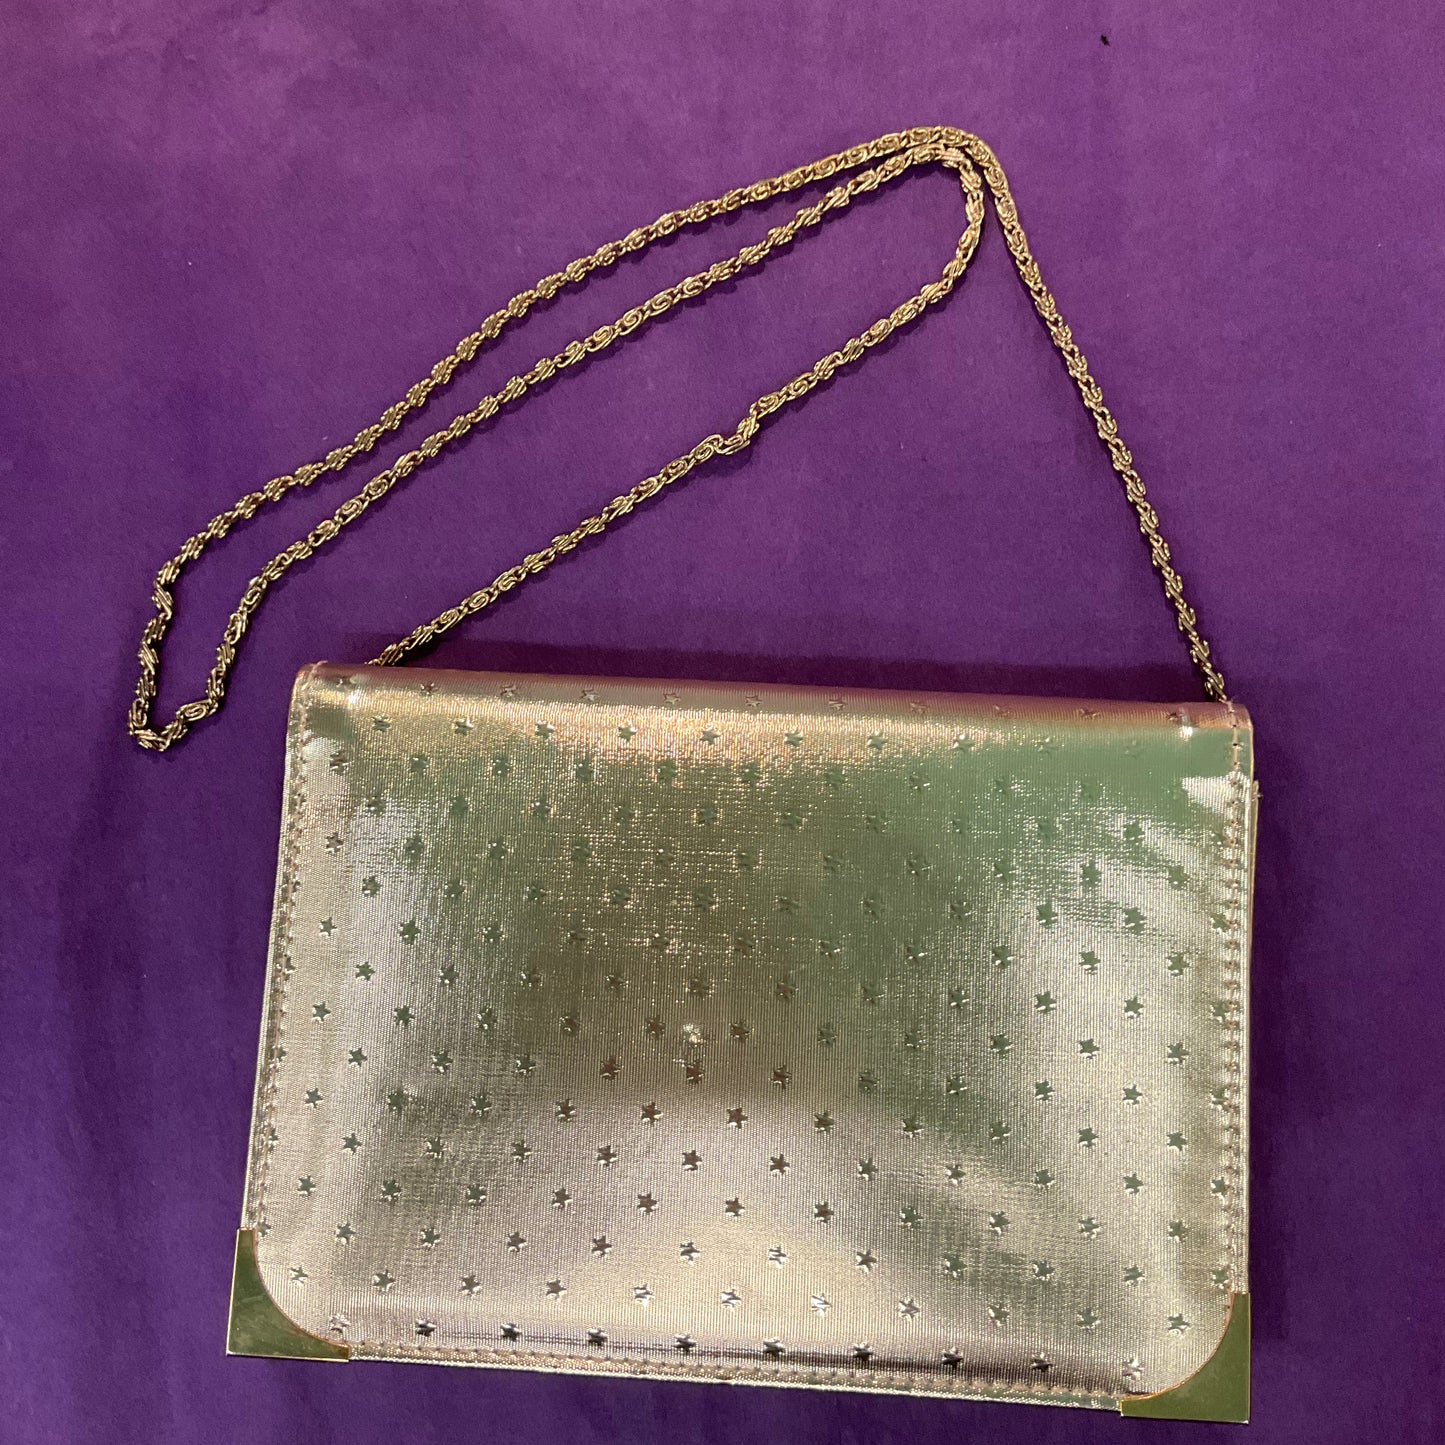 Gold ‘Star’ 1970/80s Faux Leather Evening Bag By JANETTE